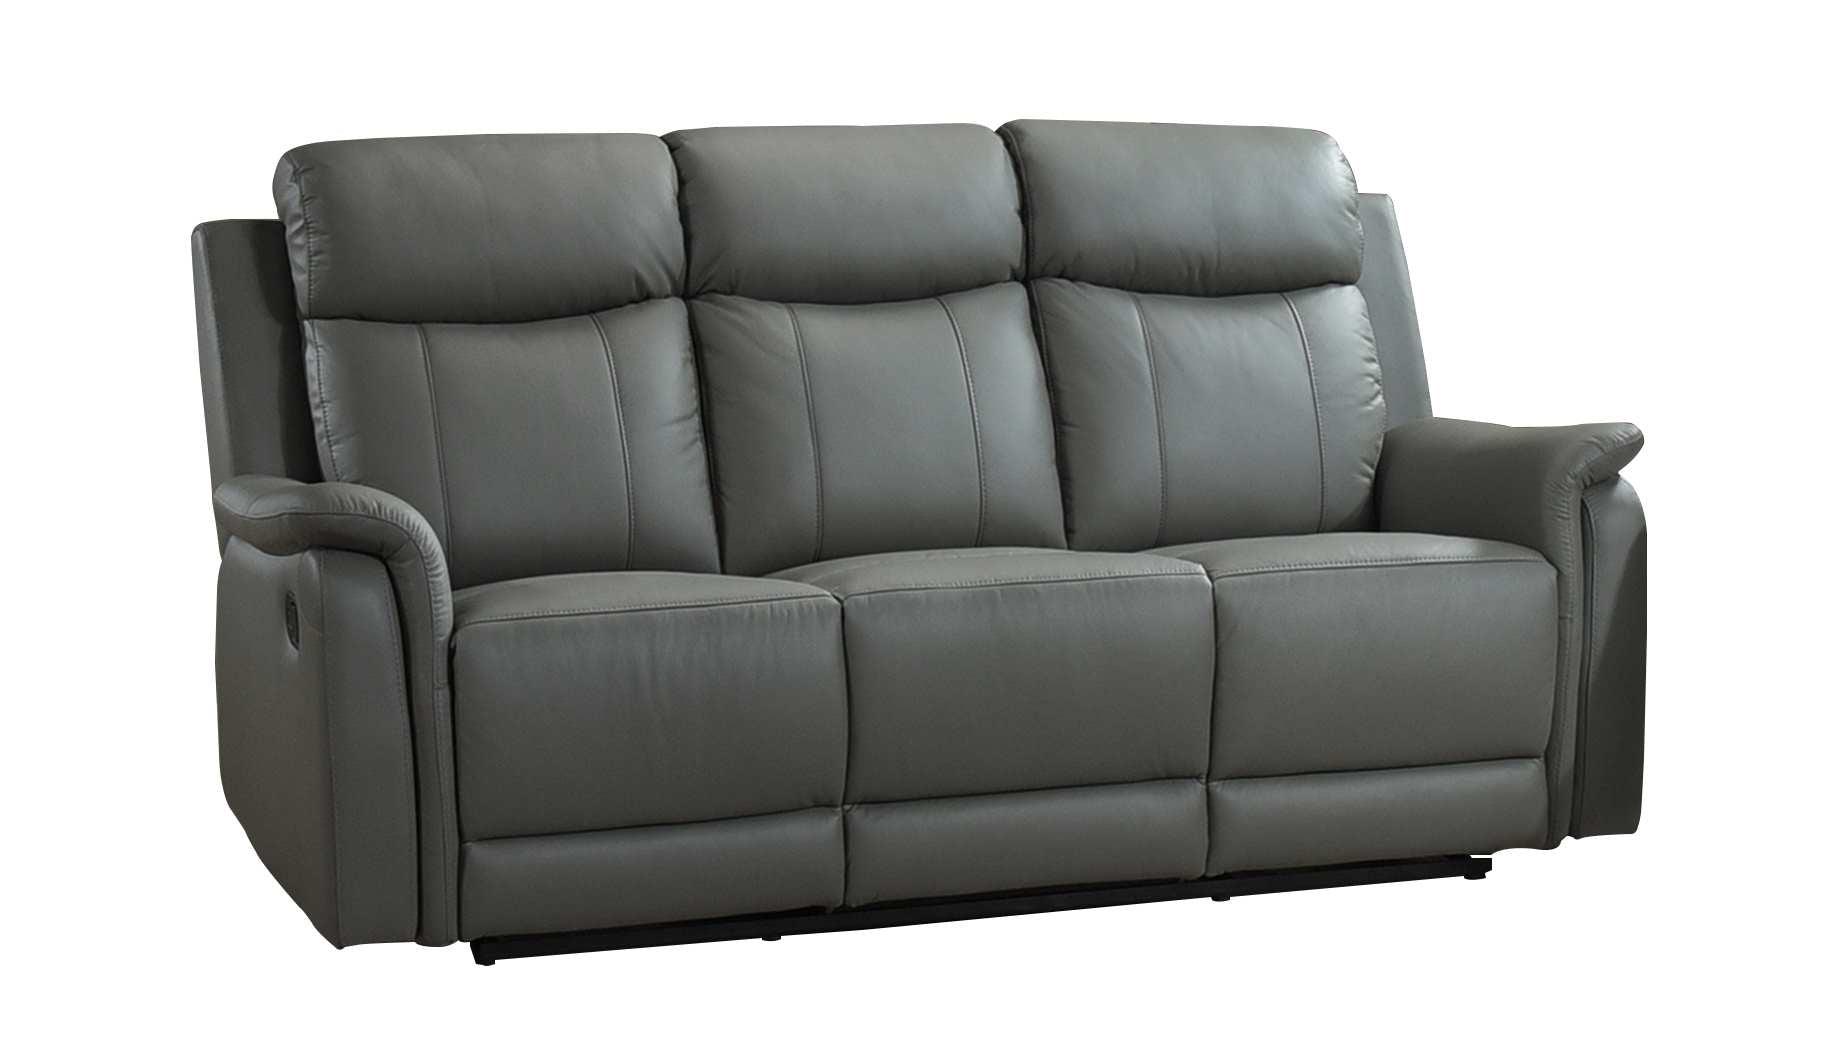 Cyrus Top Grain Leather Reclining Sofa Collection Grey 99840